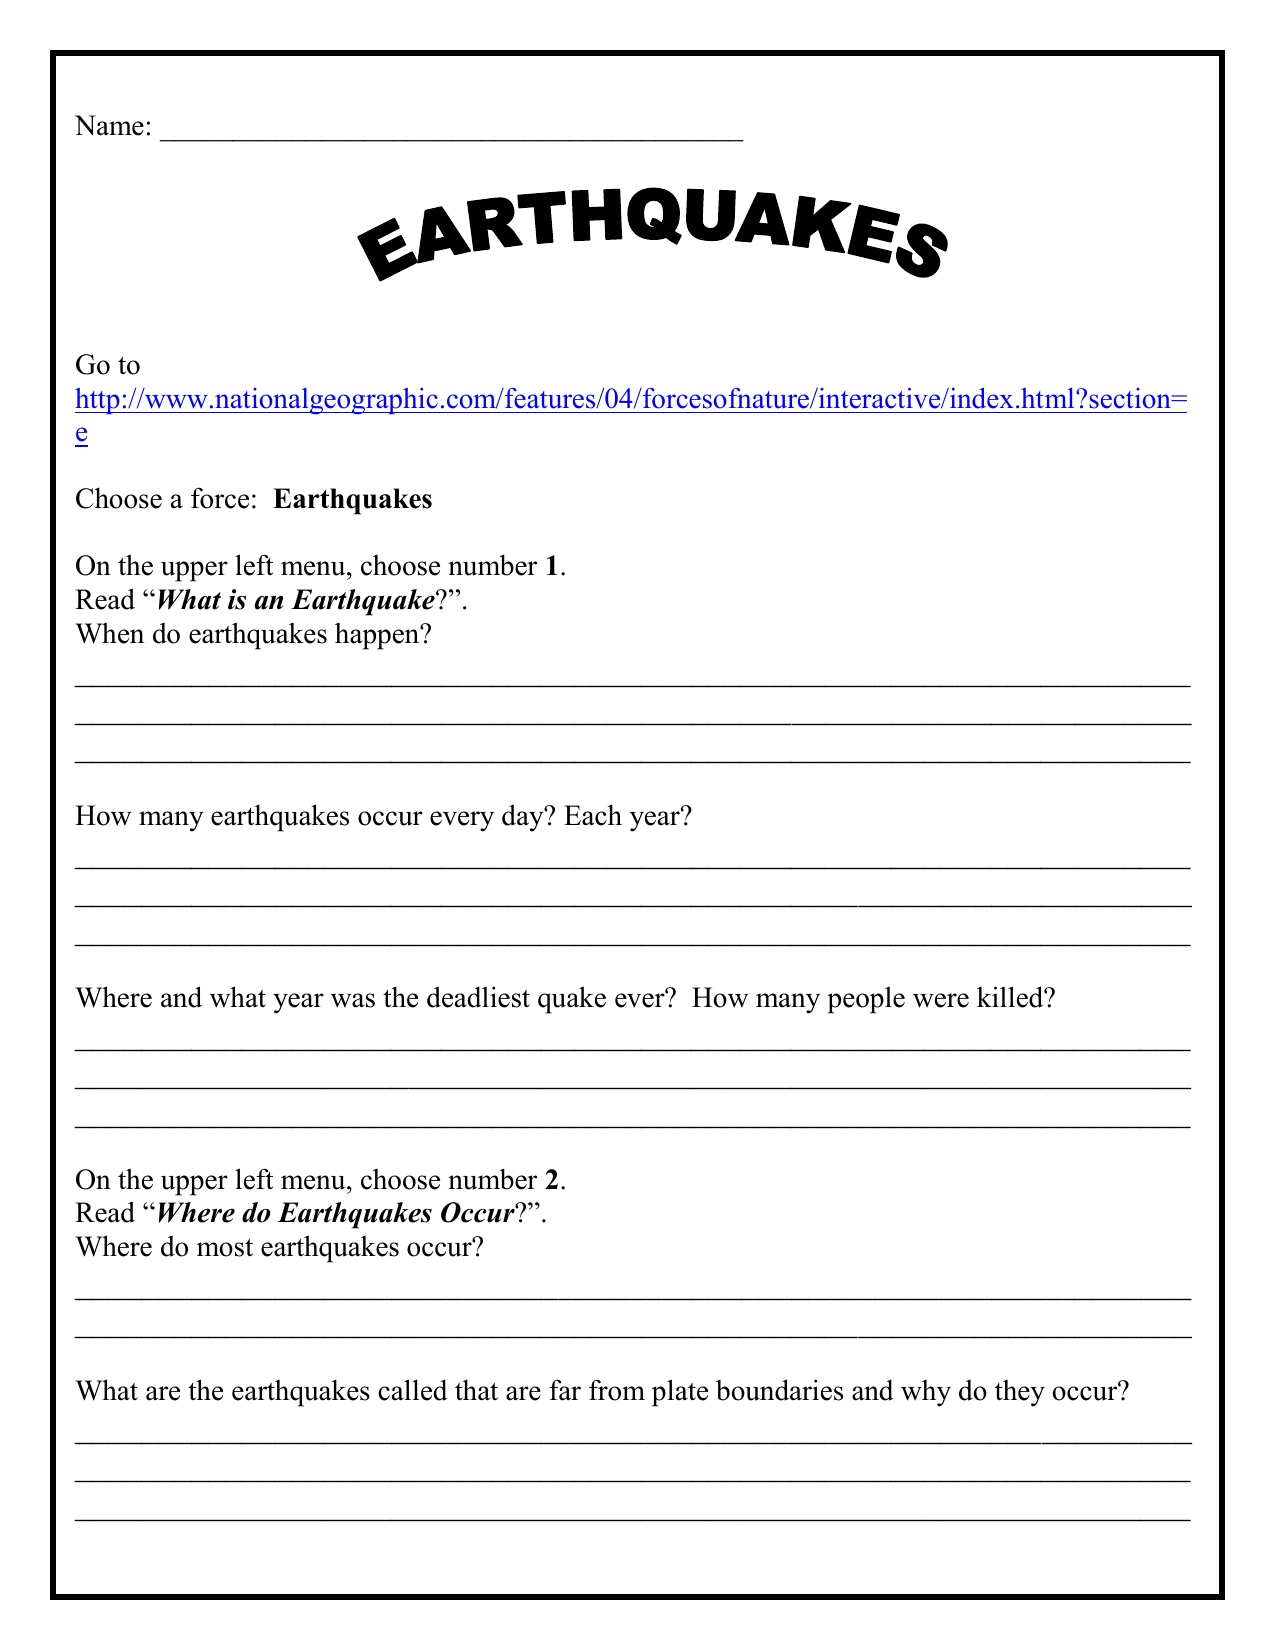 research questions about the earthquake